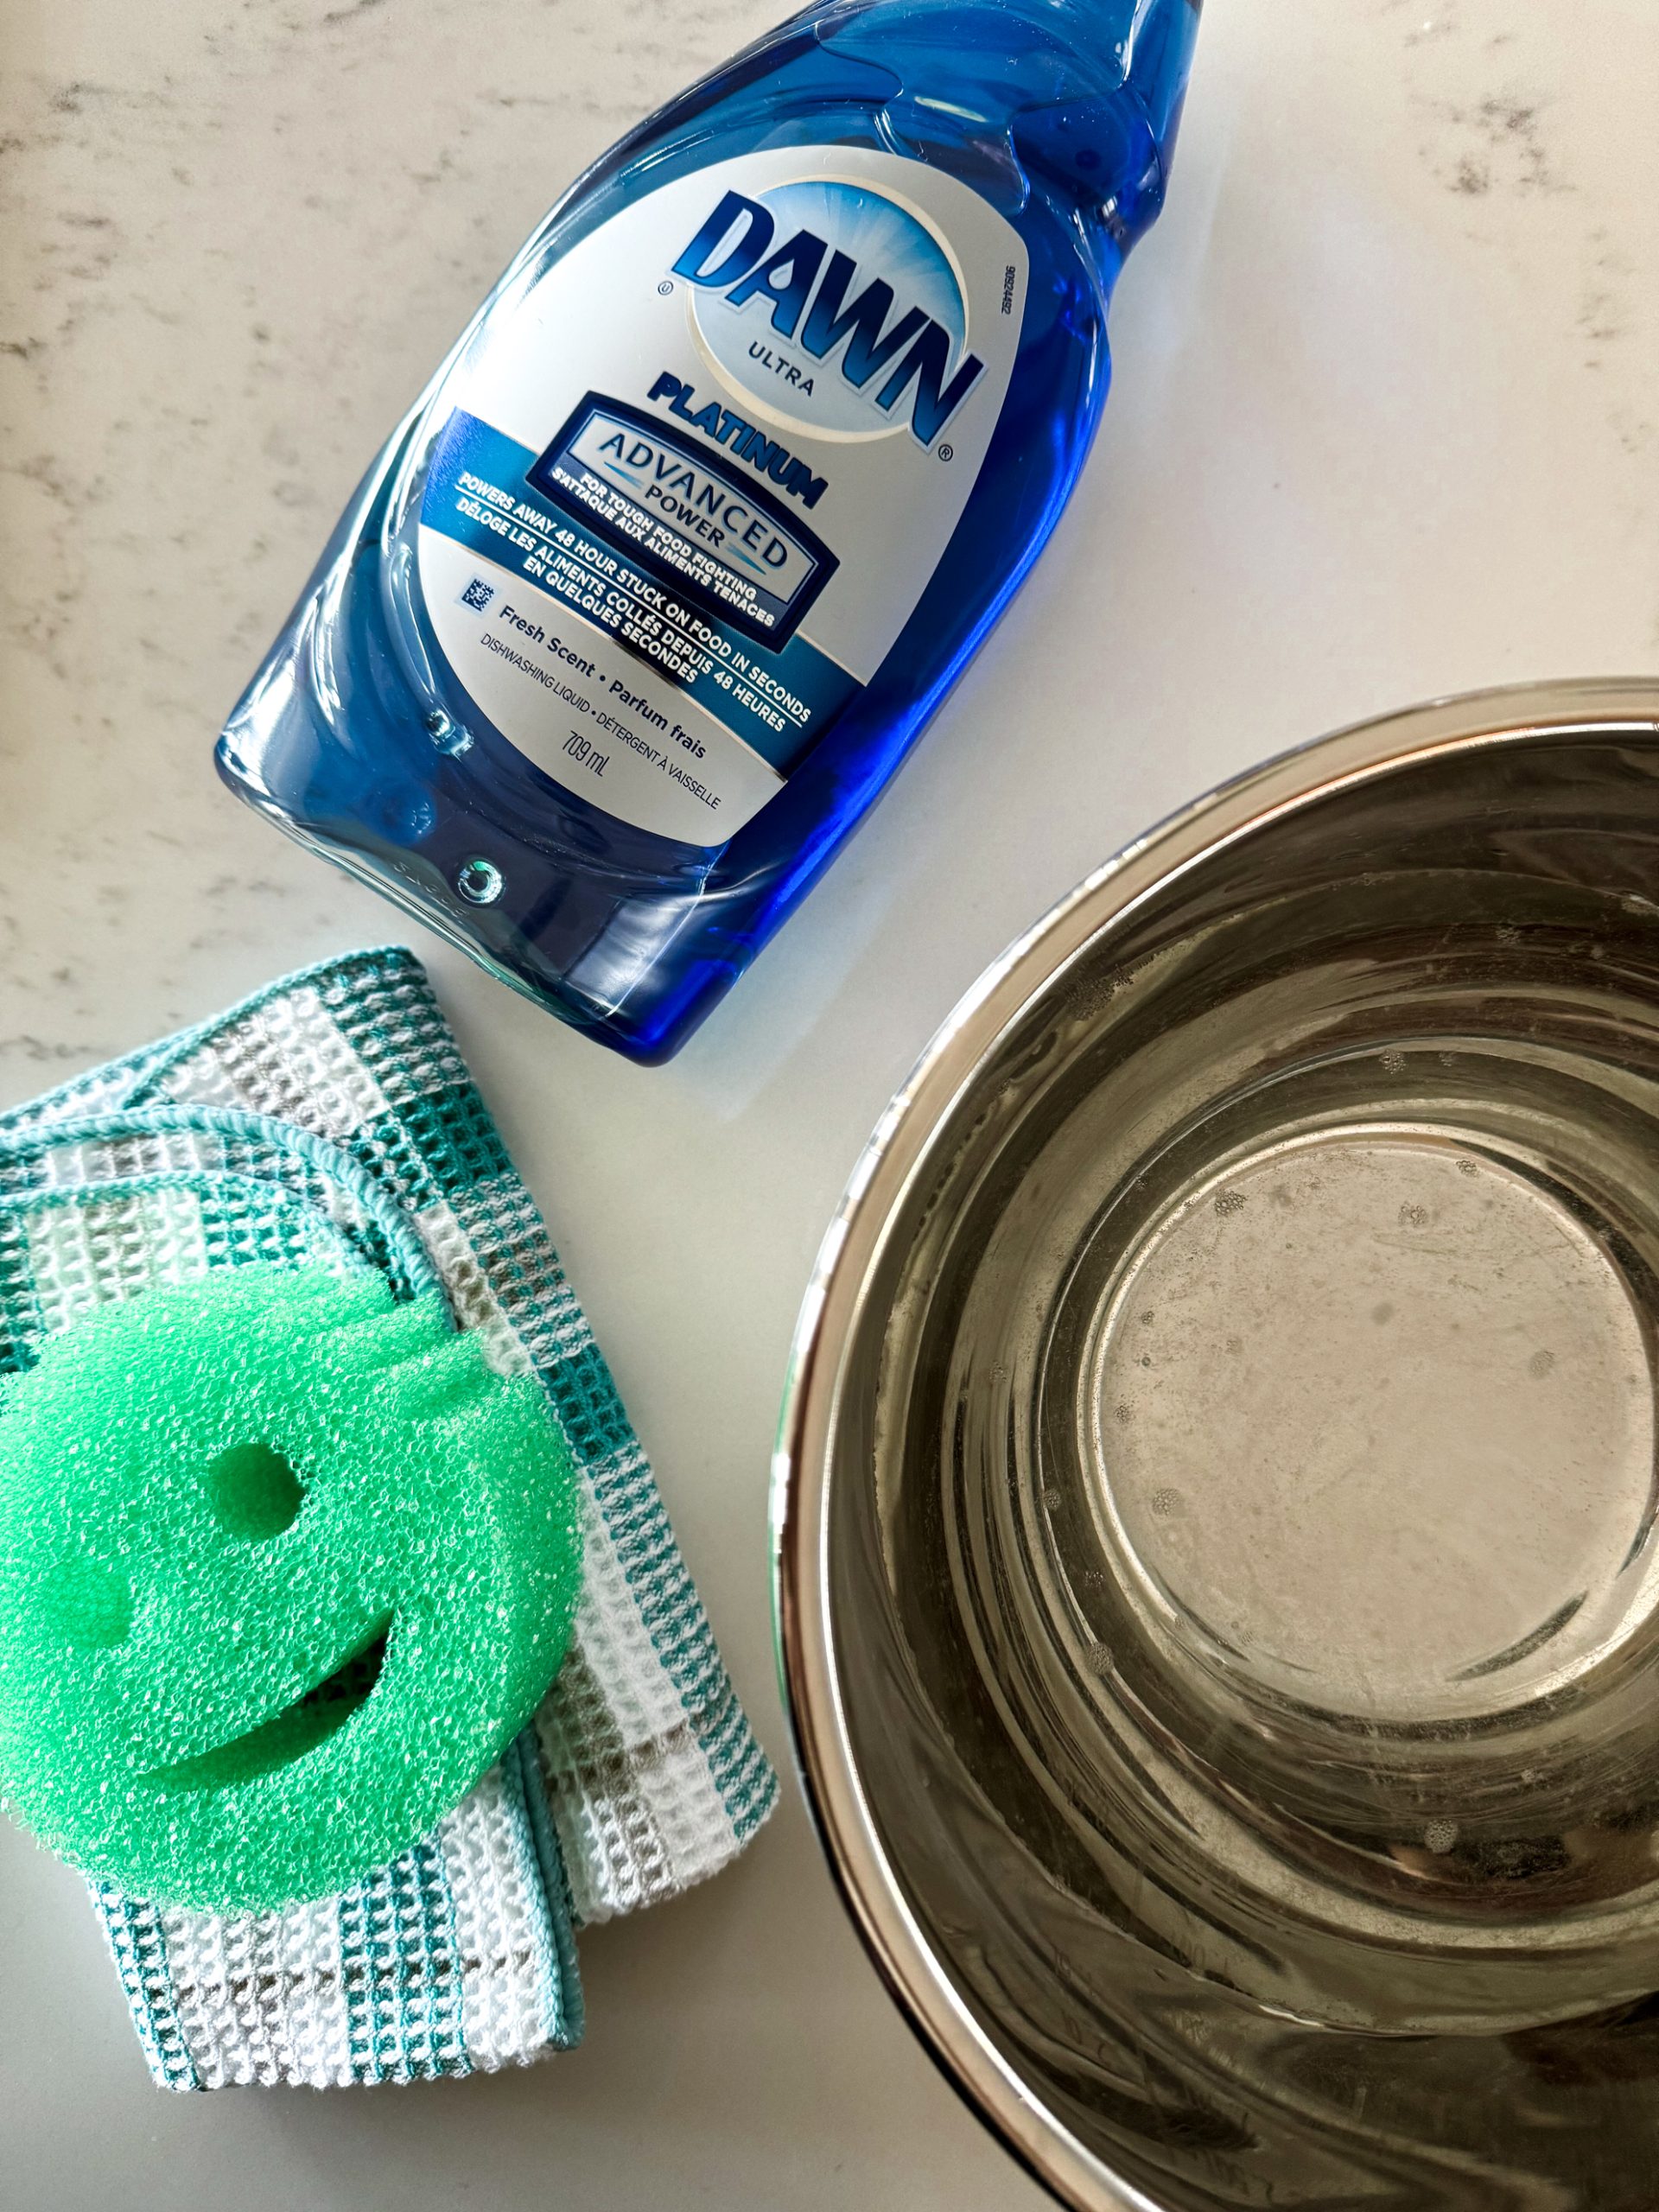 materials needed to deep clean a bbq - scrub daddy dawn dish soap and a bowl